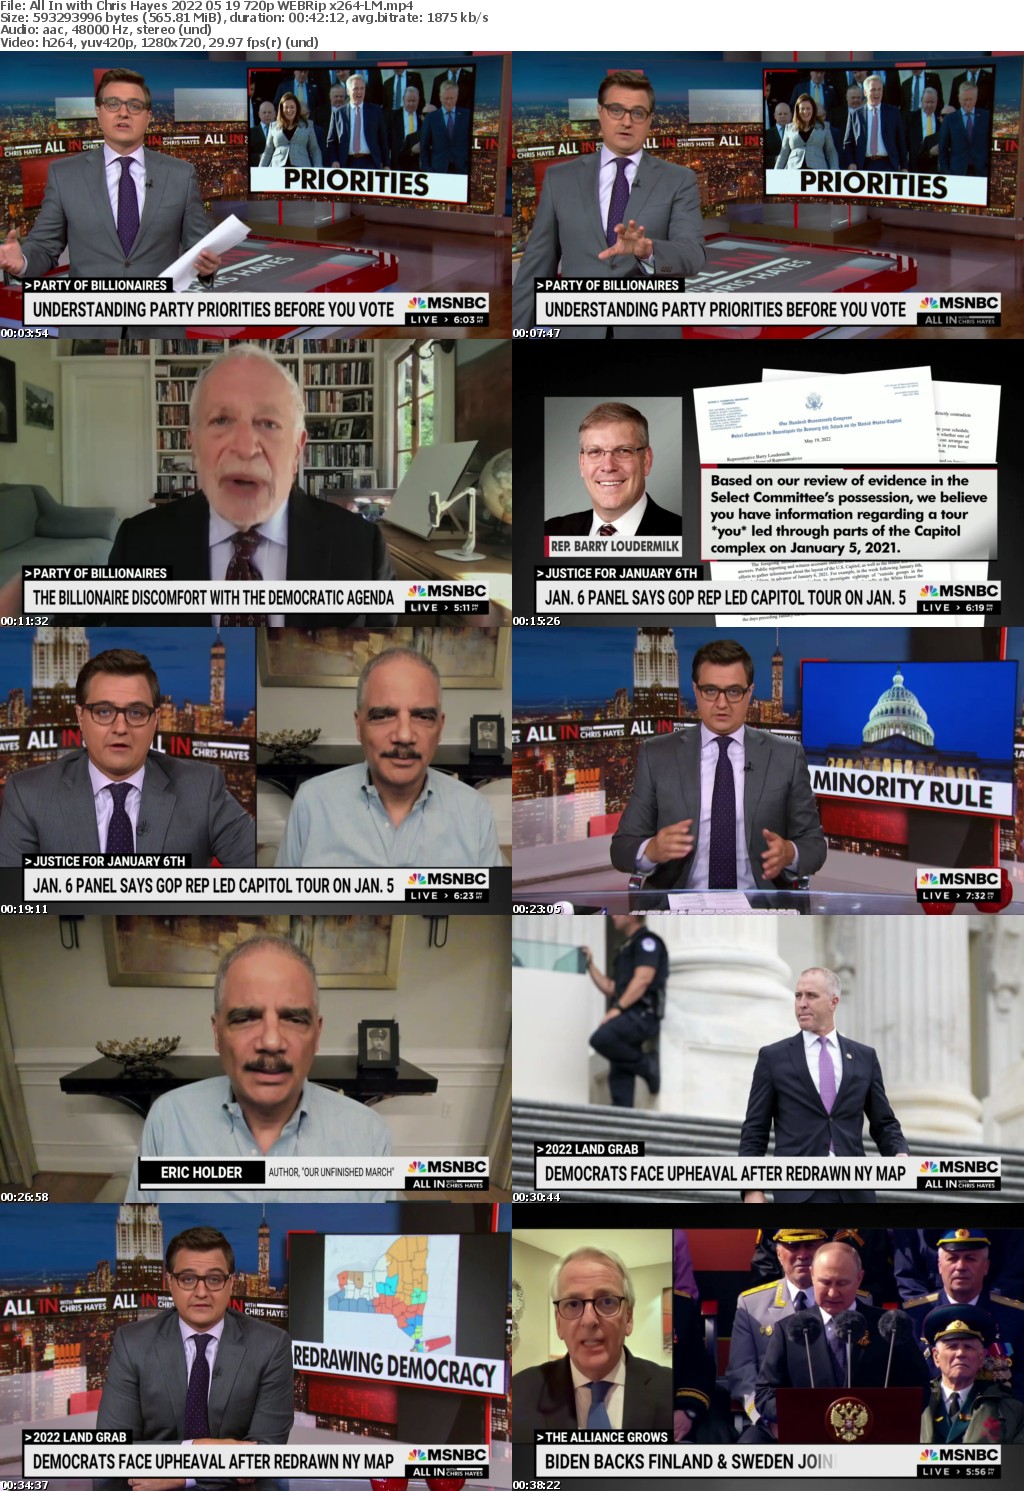 All In with Chris Hayes 2022 05 19 720p WEBRip x264-LM